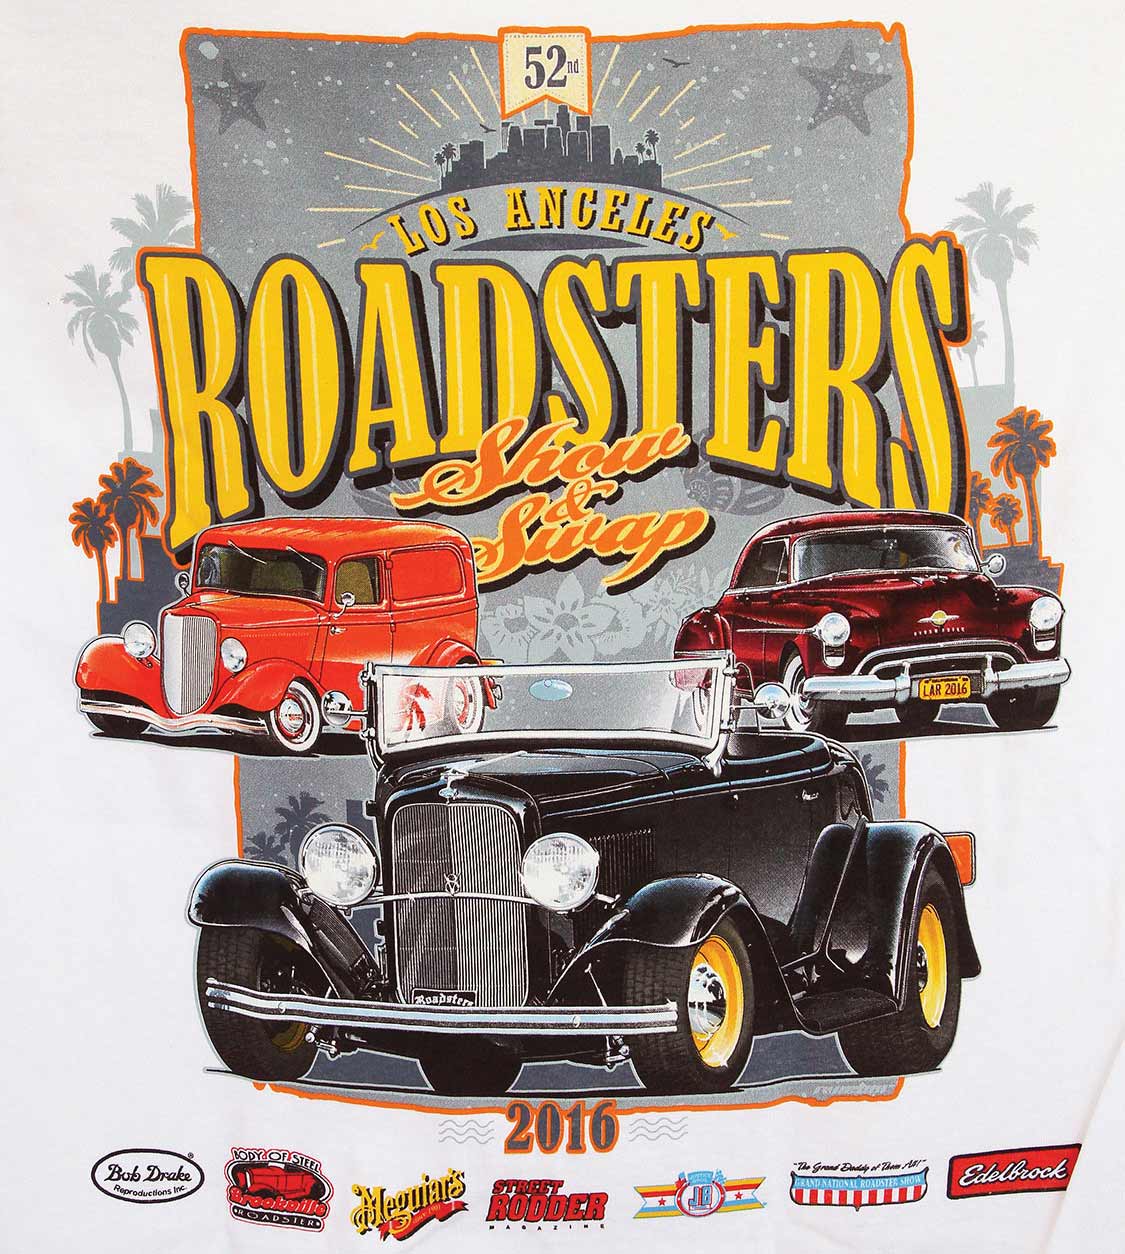 L.A. ROADSTERS SHOW'S POSTER